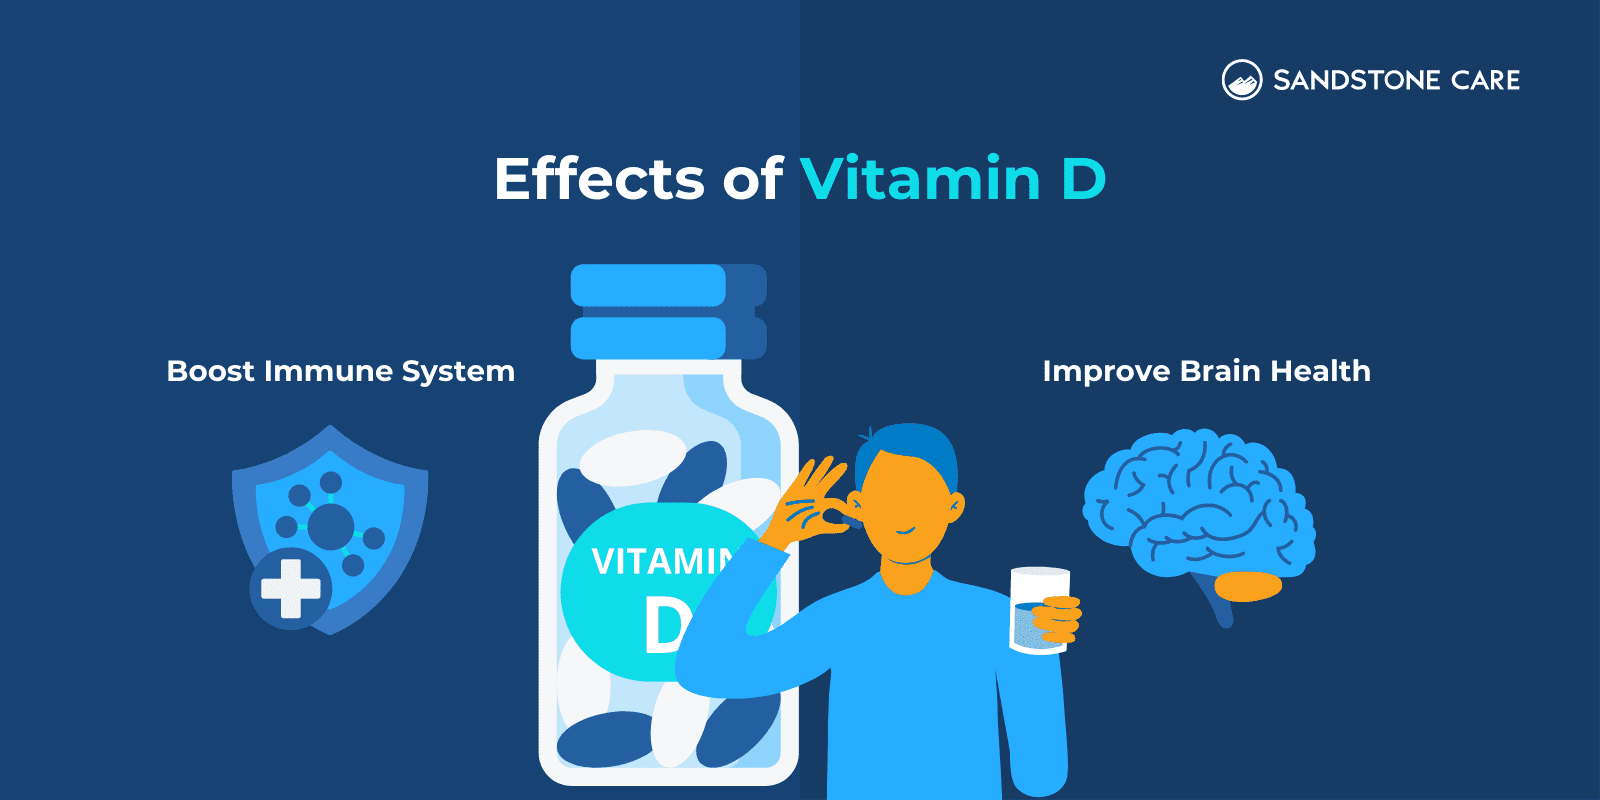 Effects of Vitamin D on Immune system and brain health represented with an illustration of a smiling man holding a vitamin D pill in front of the Vitamin D pill bottle